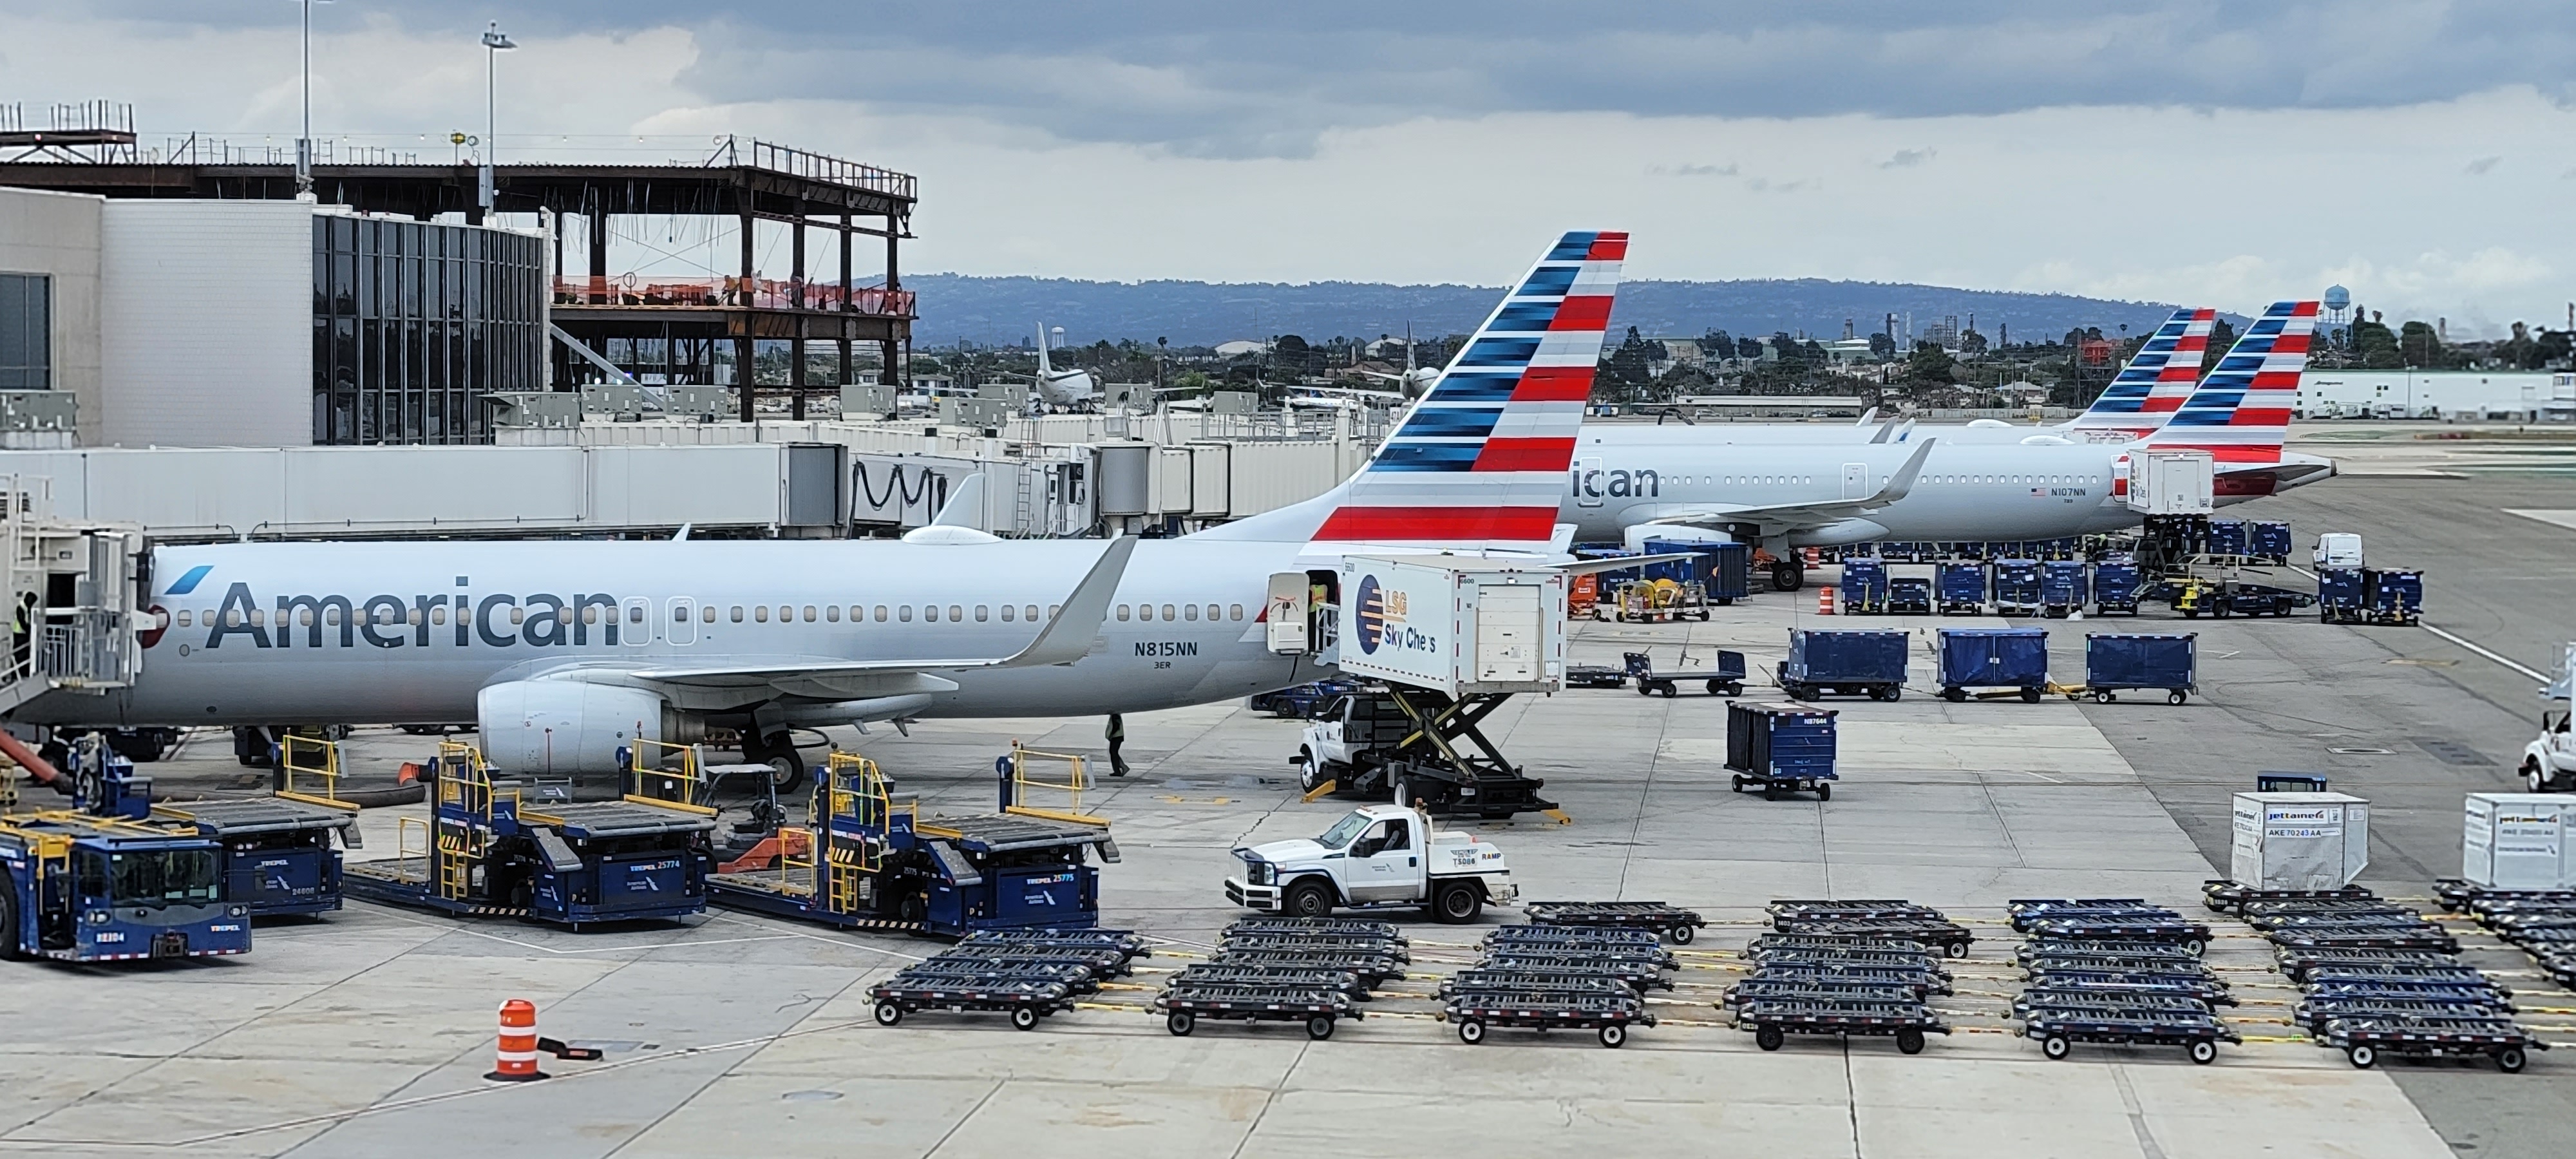 LAX American 2 - Travel News, Insights & Resources.